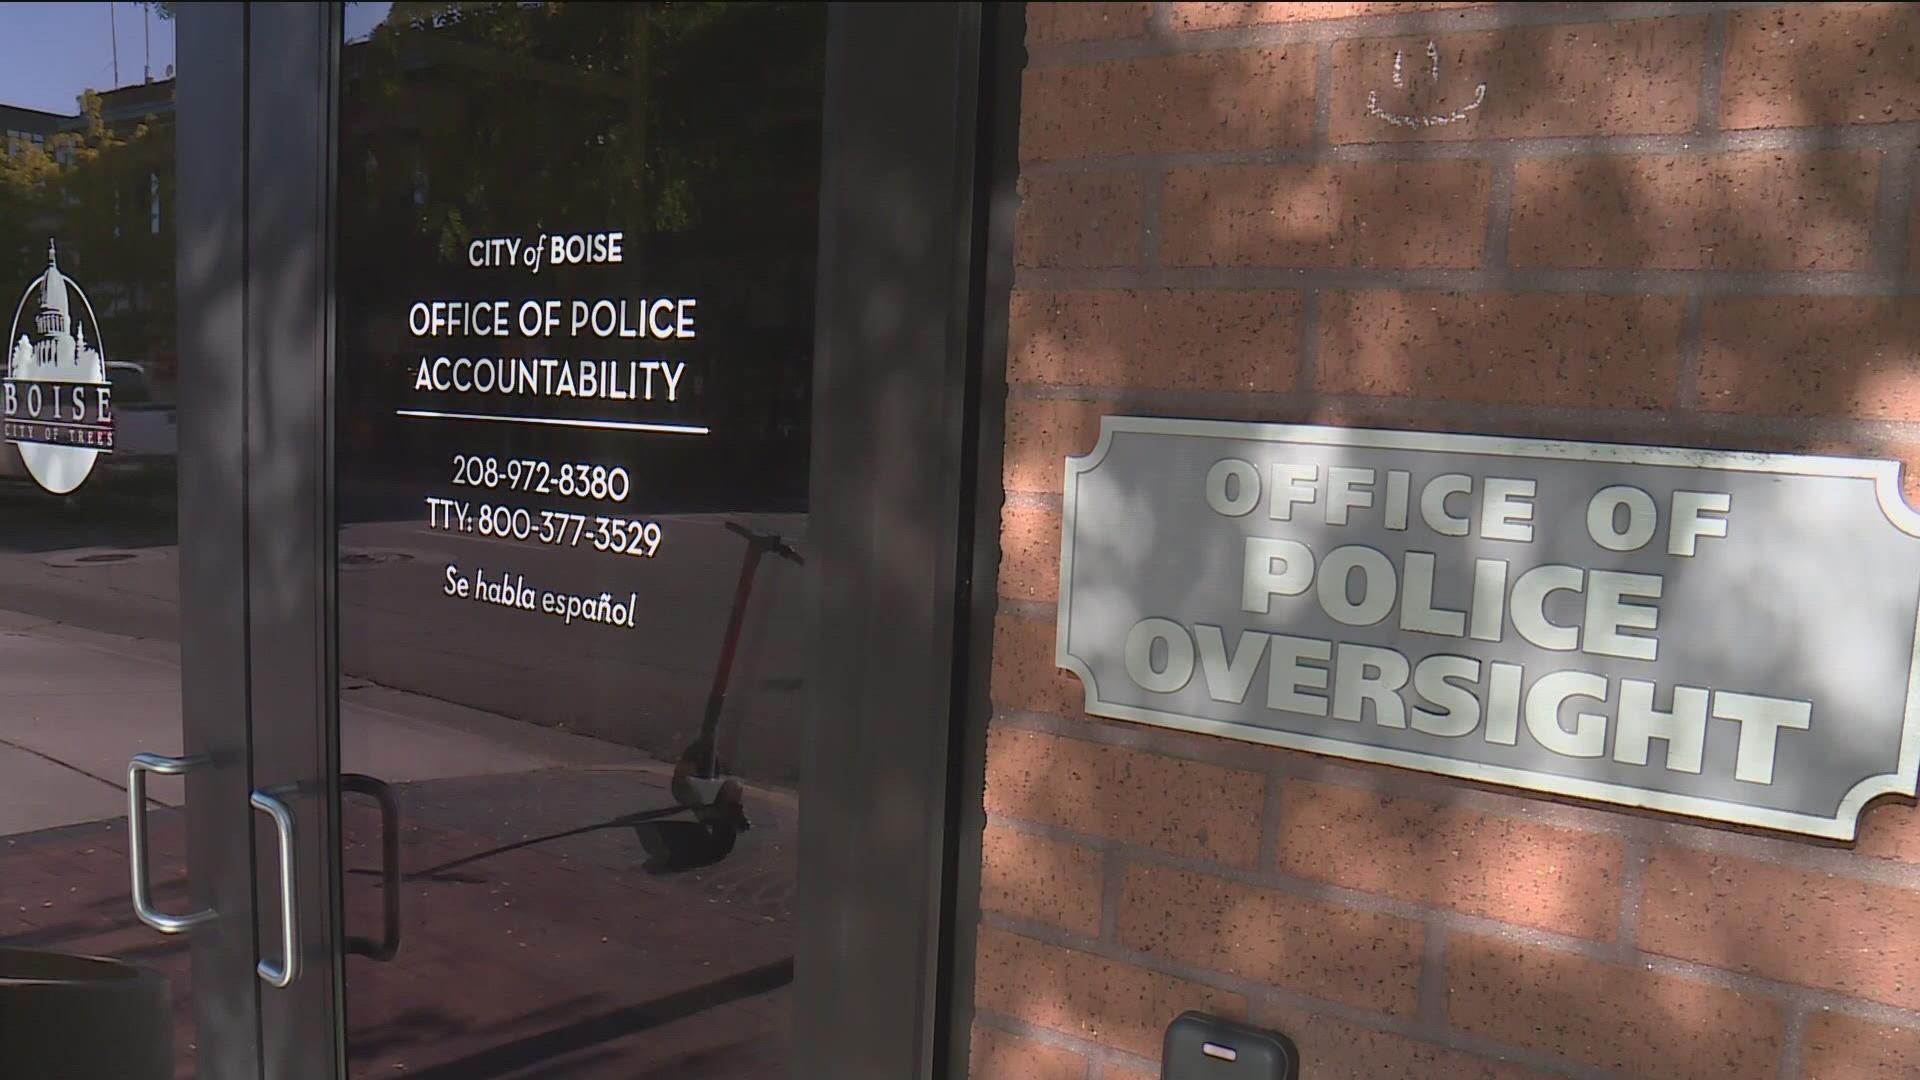 In a filing by the City of Boise in response to Jesus Jara's lawsuit, the city says employment decisions made about Jara were made for non-discriminatory reasons.